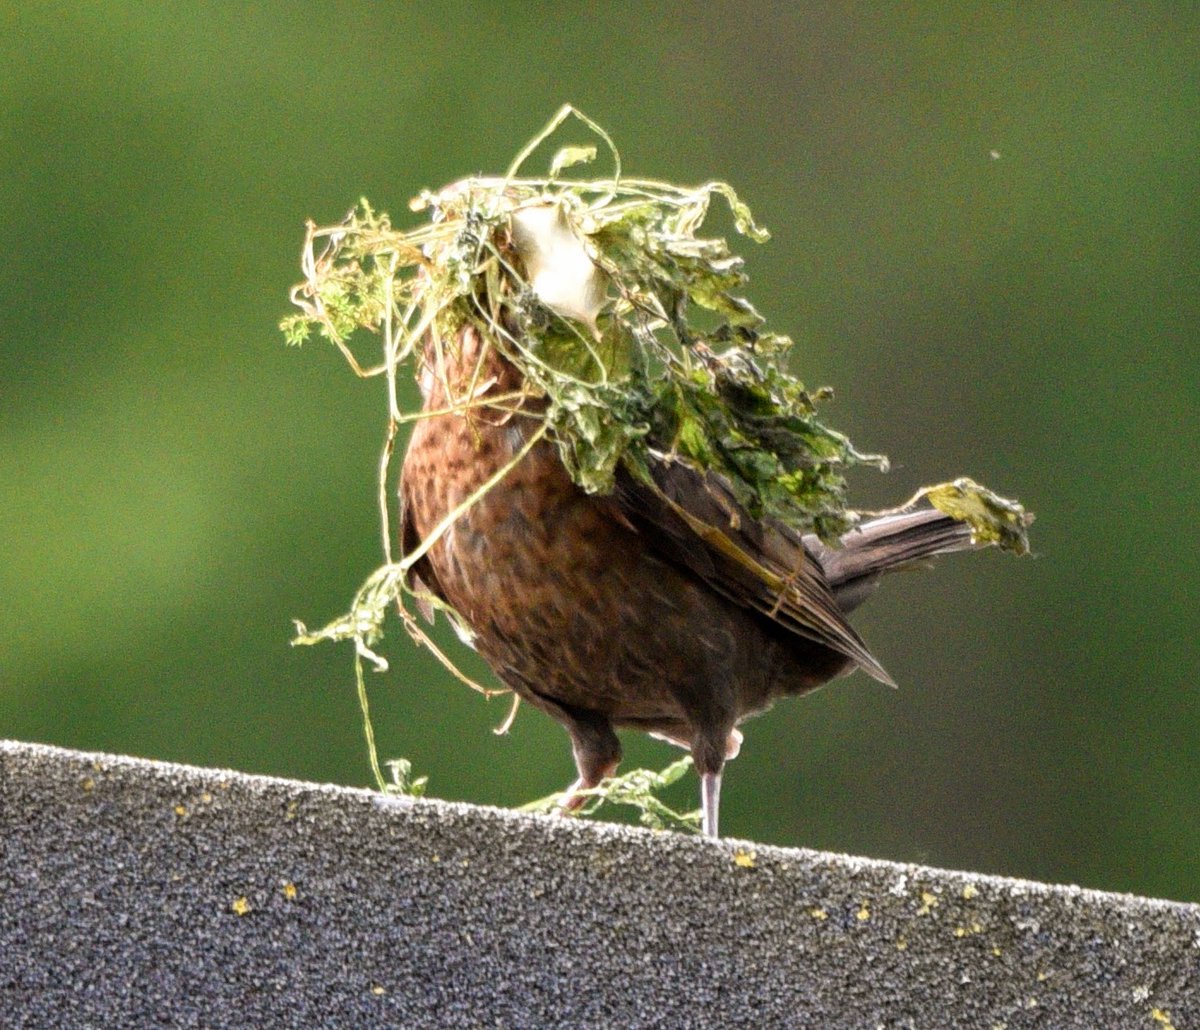 Sunday afternoon at home spent on a little weeding of the front garden. Greatly appreciated by Mrs Blackbird perhaps wishing to build nest number 2 or at least do some repairs.. I hope she can see where she is going! #birdwatching #NaturePhotography 🪺